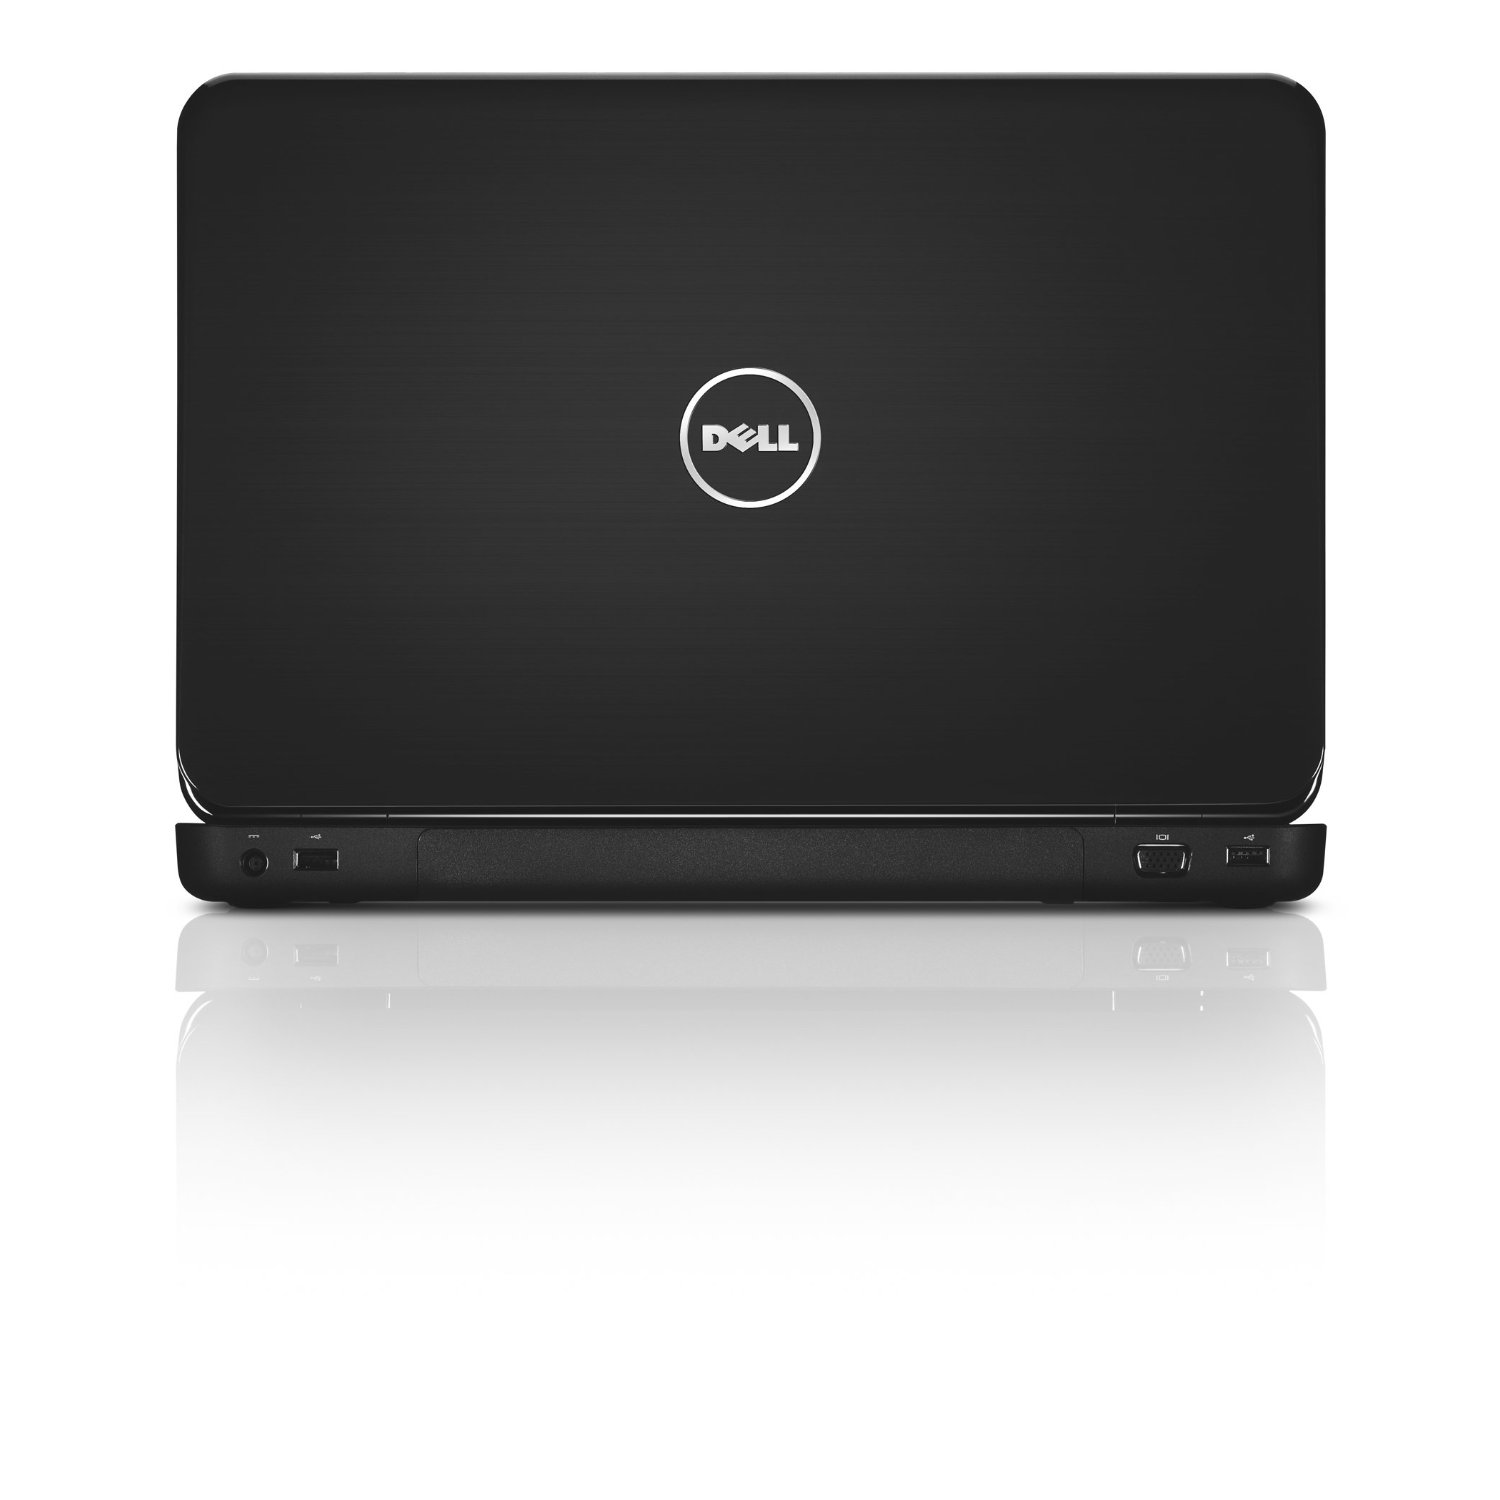 http://thetechjournal.com/wp-content/uploads/images/1110/1318421913-dell-inspiron-15r-i15rn51107223dbk-156inch-laptop-7.jpg